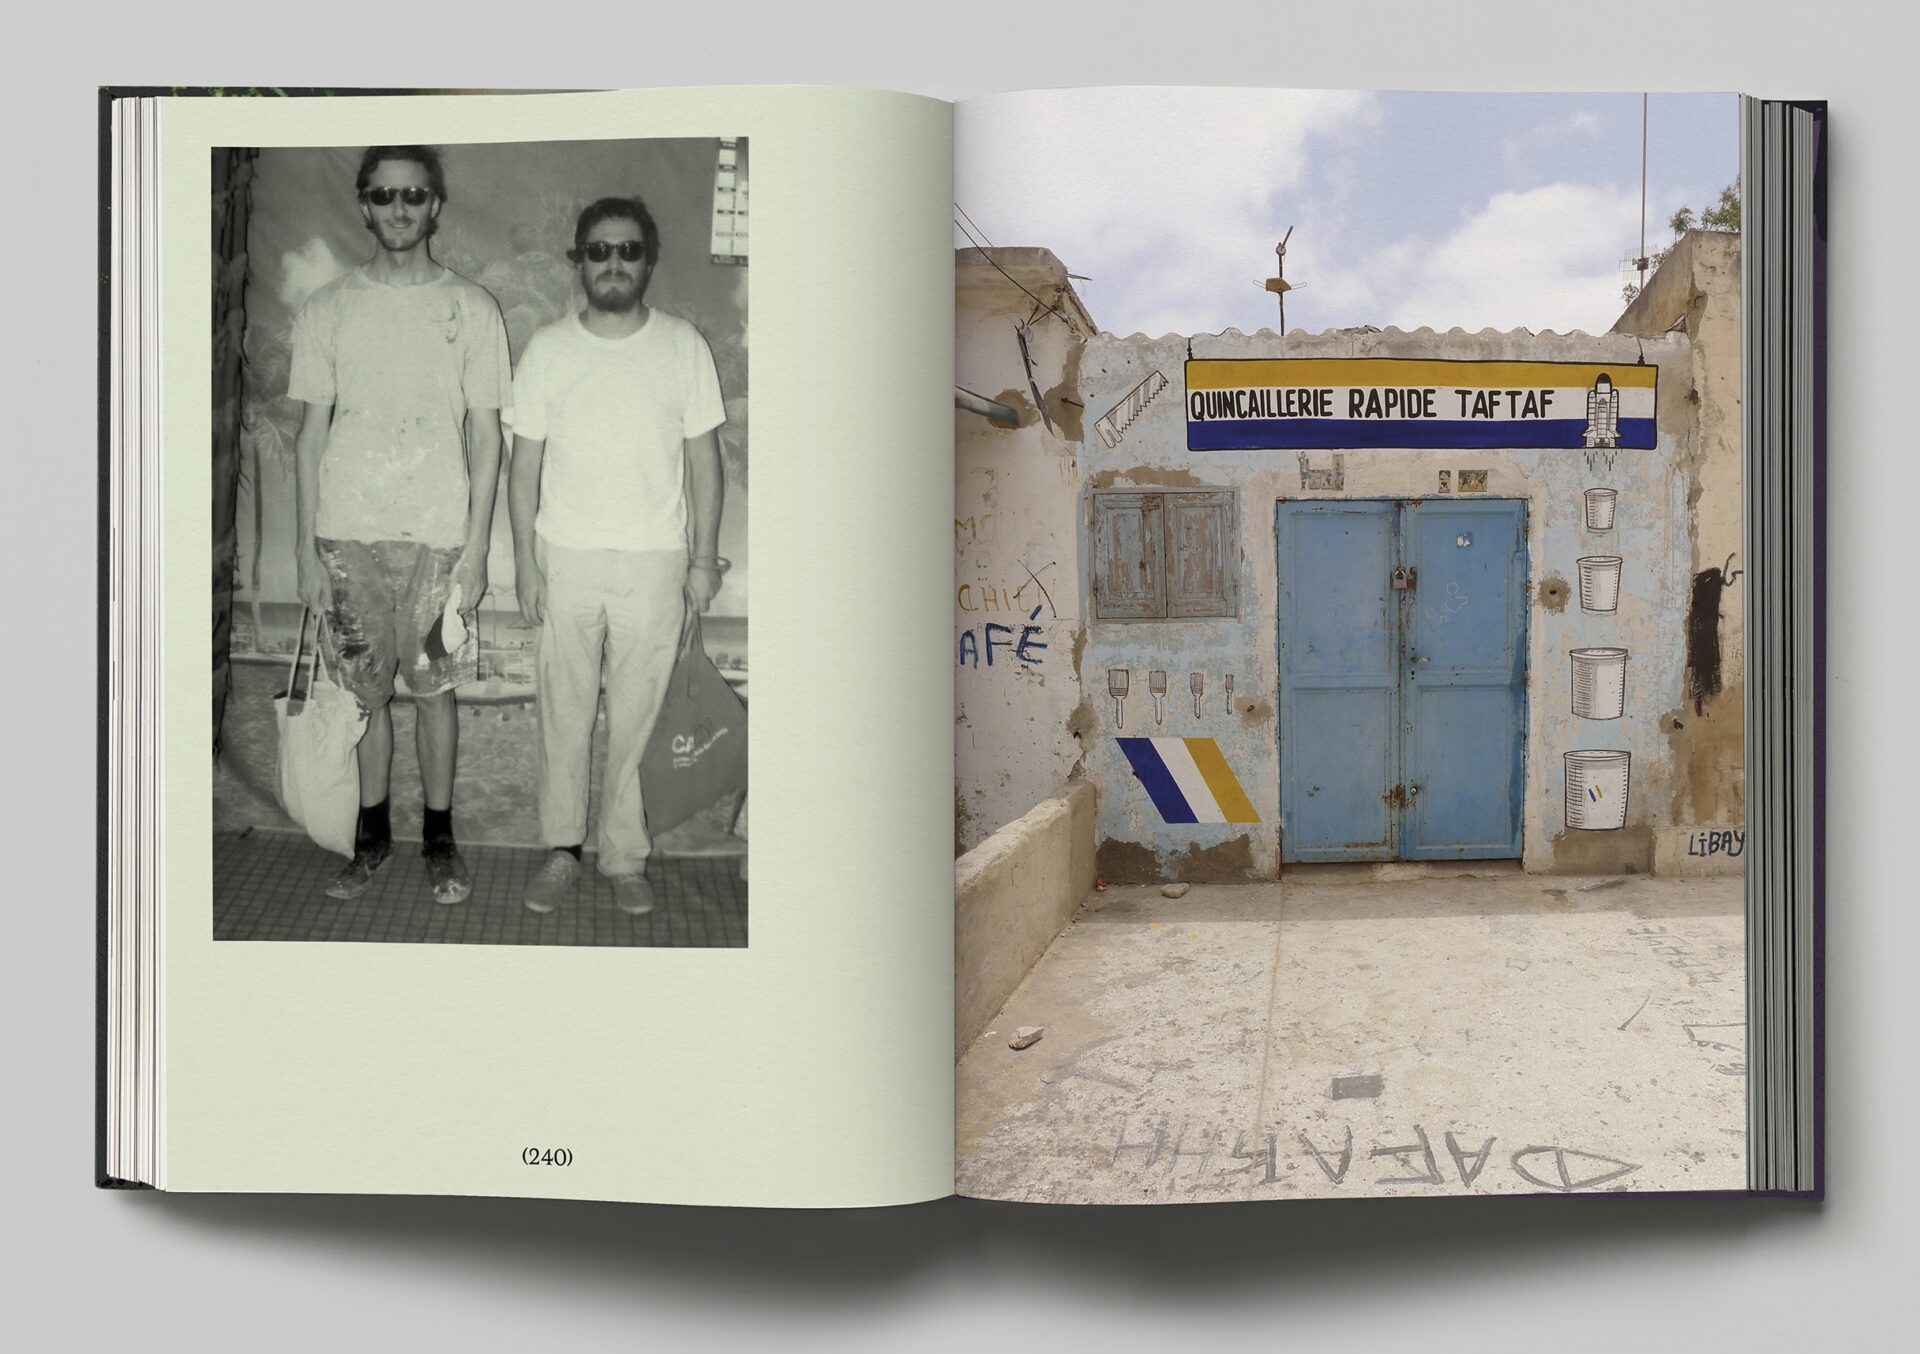 a spread from Escif's forthcoming book, with a black-and-white photograph of two young men on the left and a facade of a small shop somewhere in Europe on the right with a sign in French